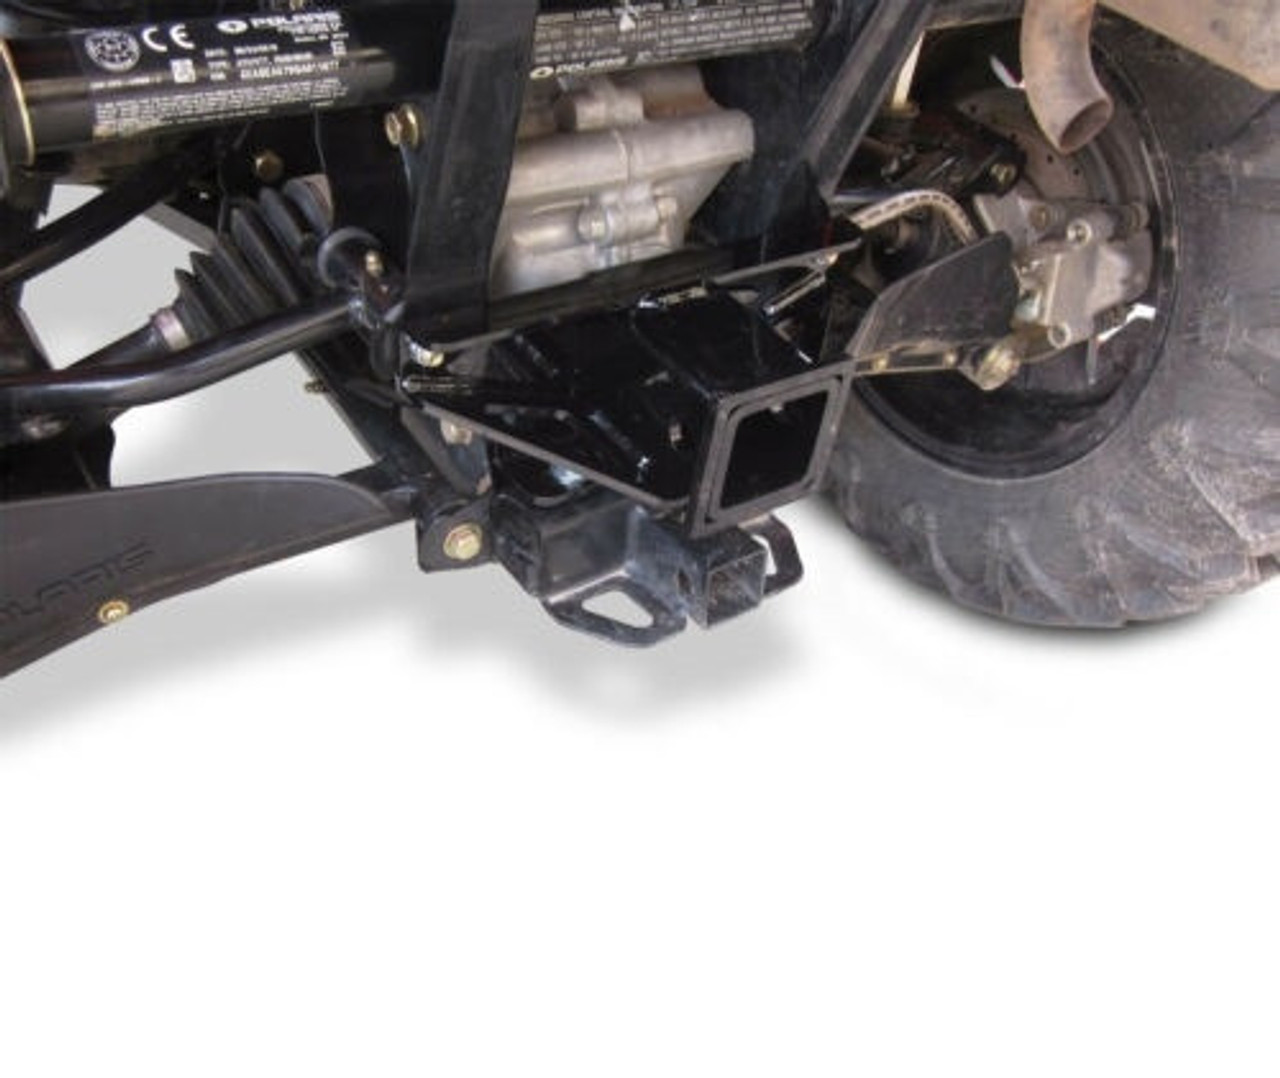 Huge Selection Of Quad And ATV Parts And Accessories! Receiver